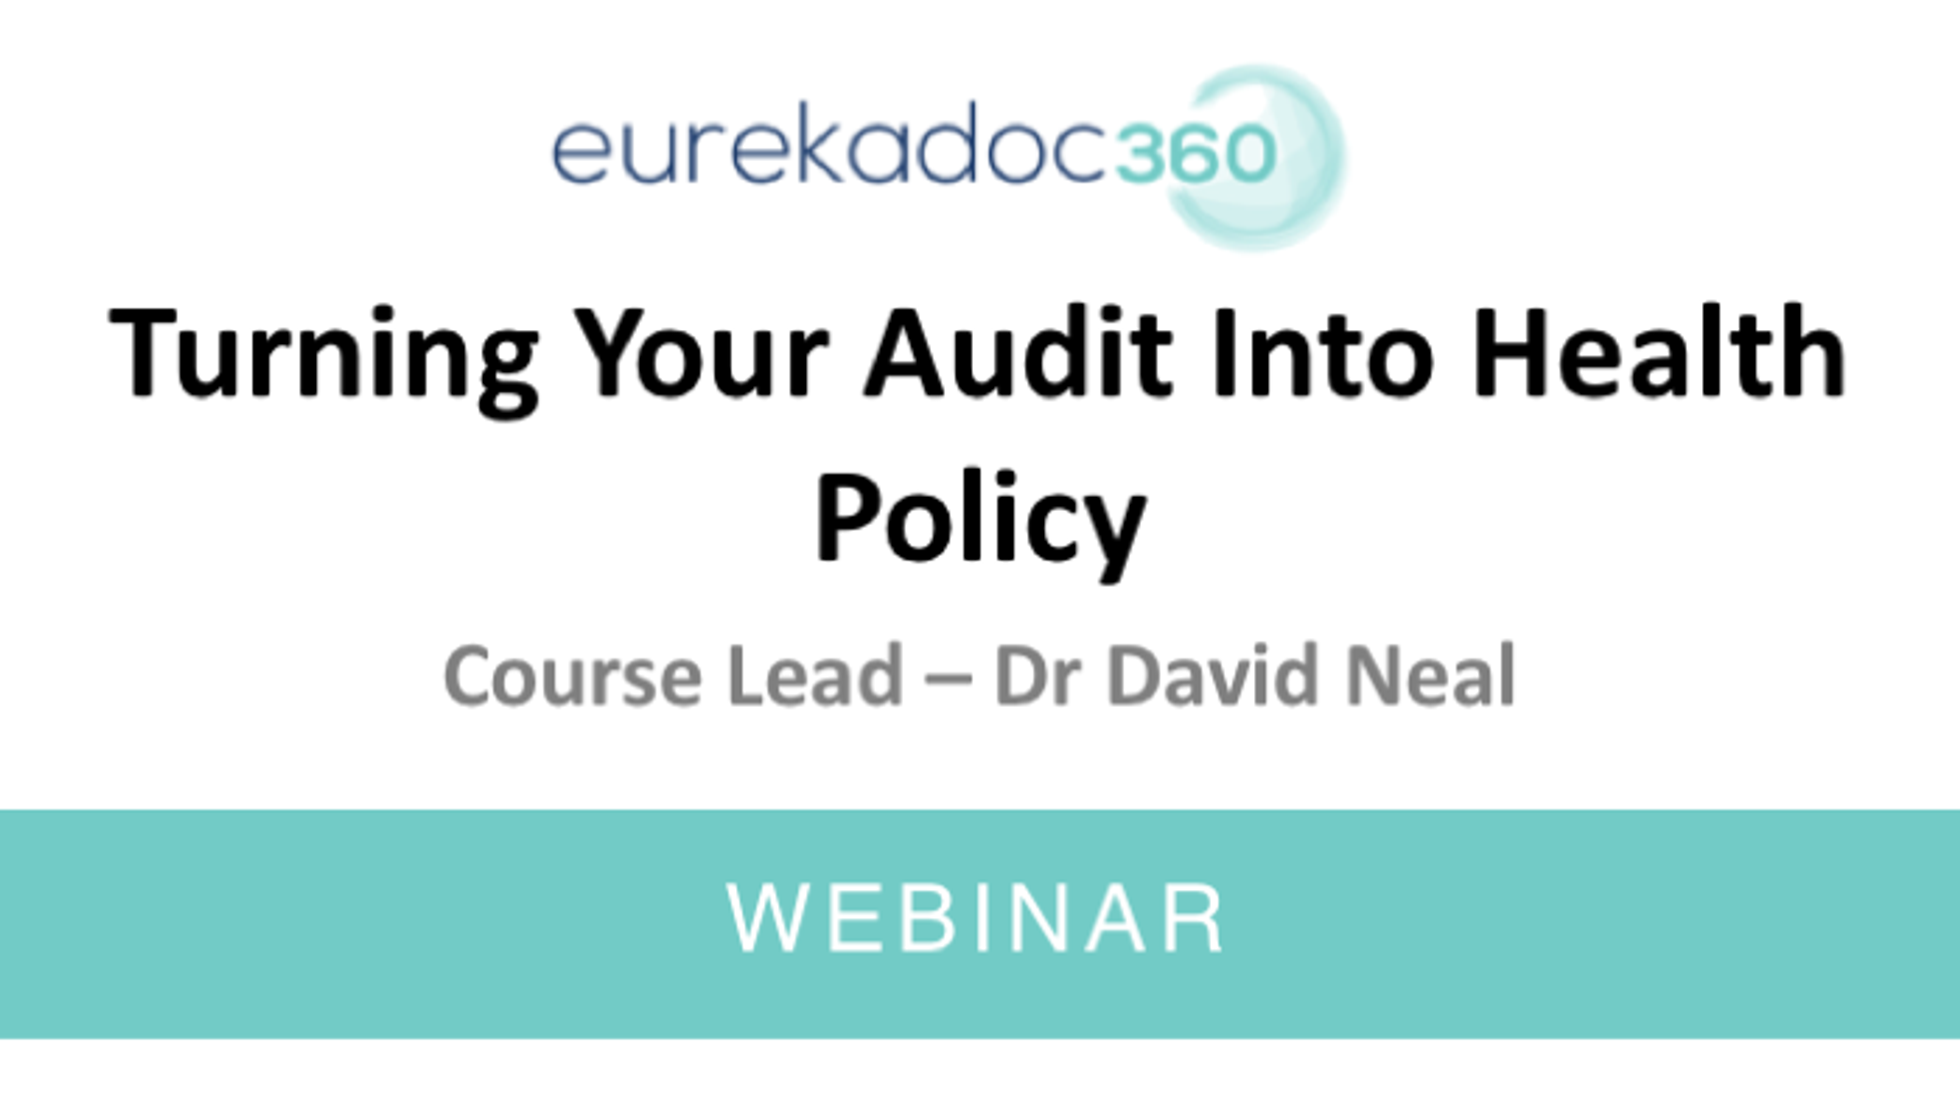 Turning your Audit into Health Policy